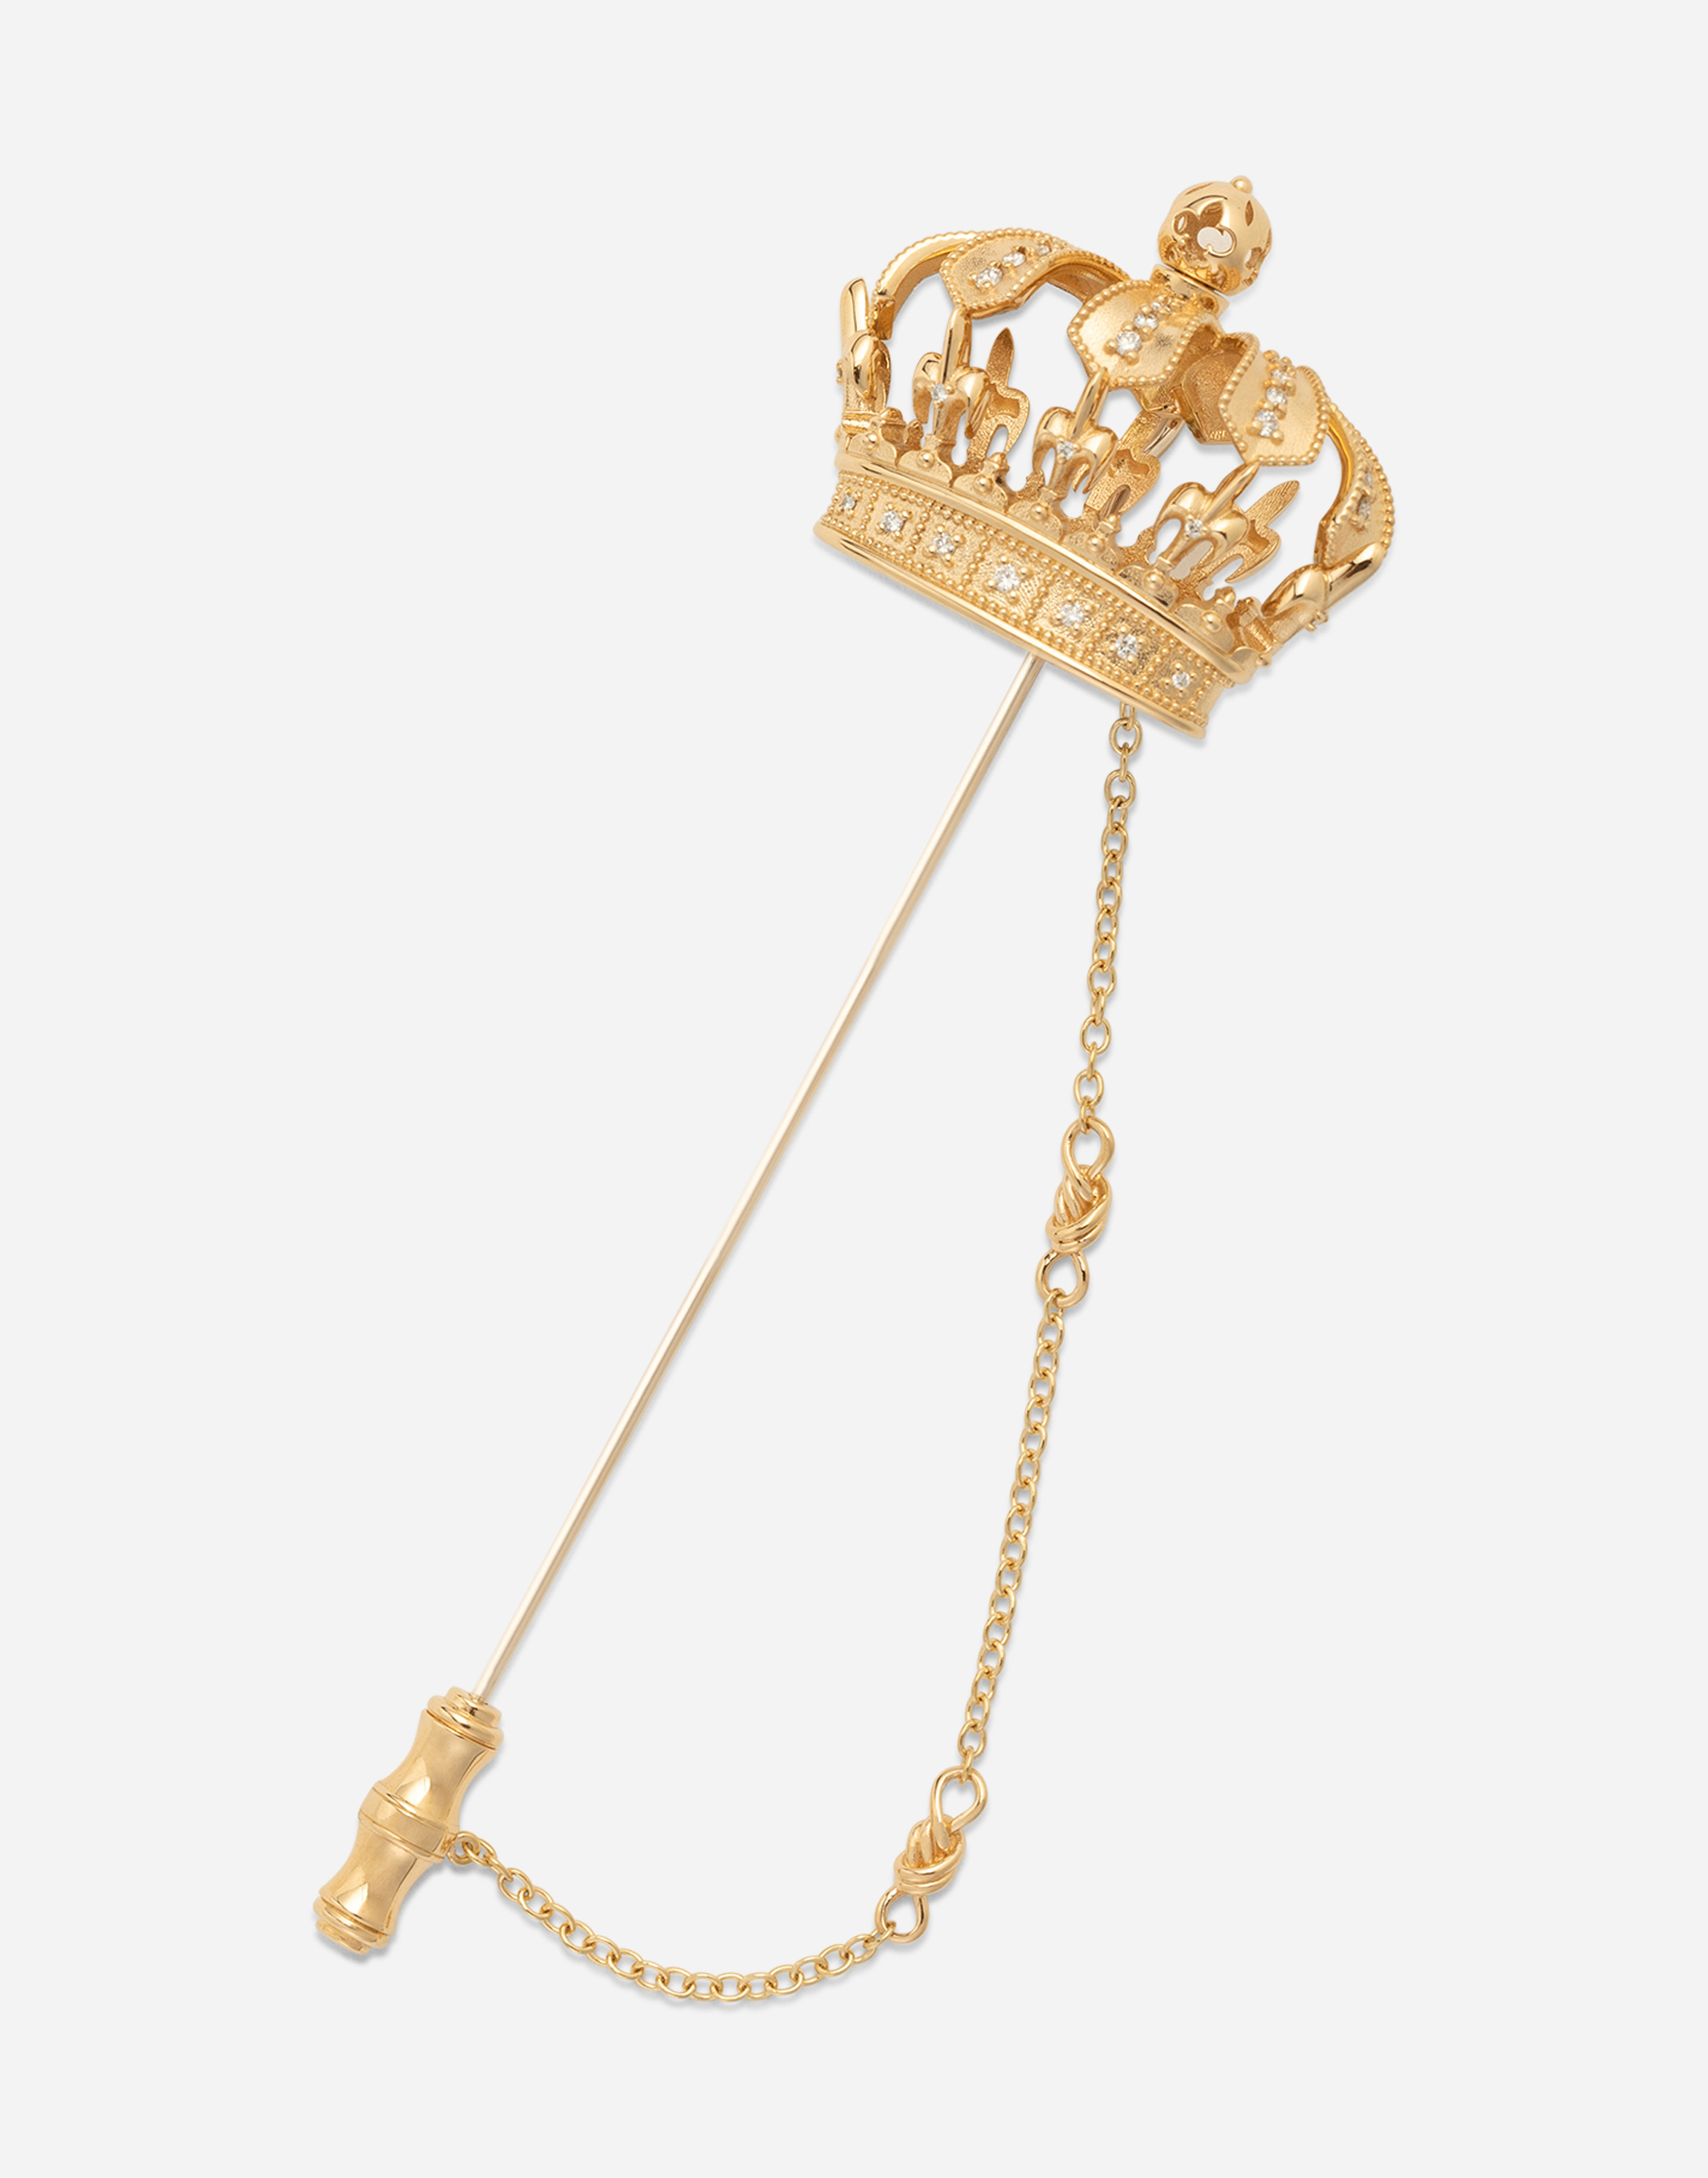 Dolce & Gabbana Crown Stick Pin Brooch In Yellow And White Gold With Curly Gold Thread Embellishments And Sphere